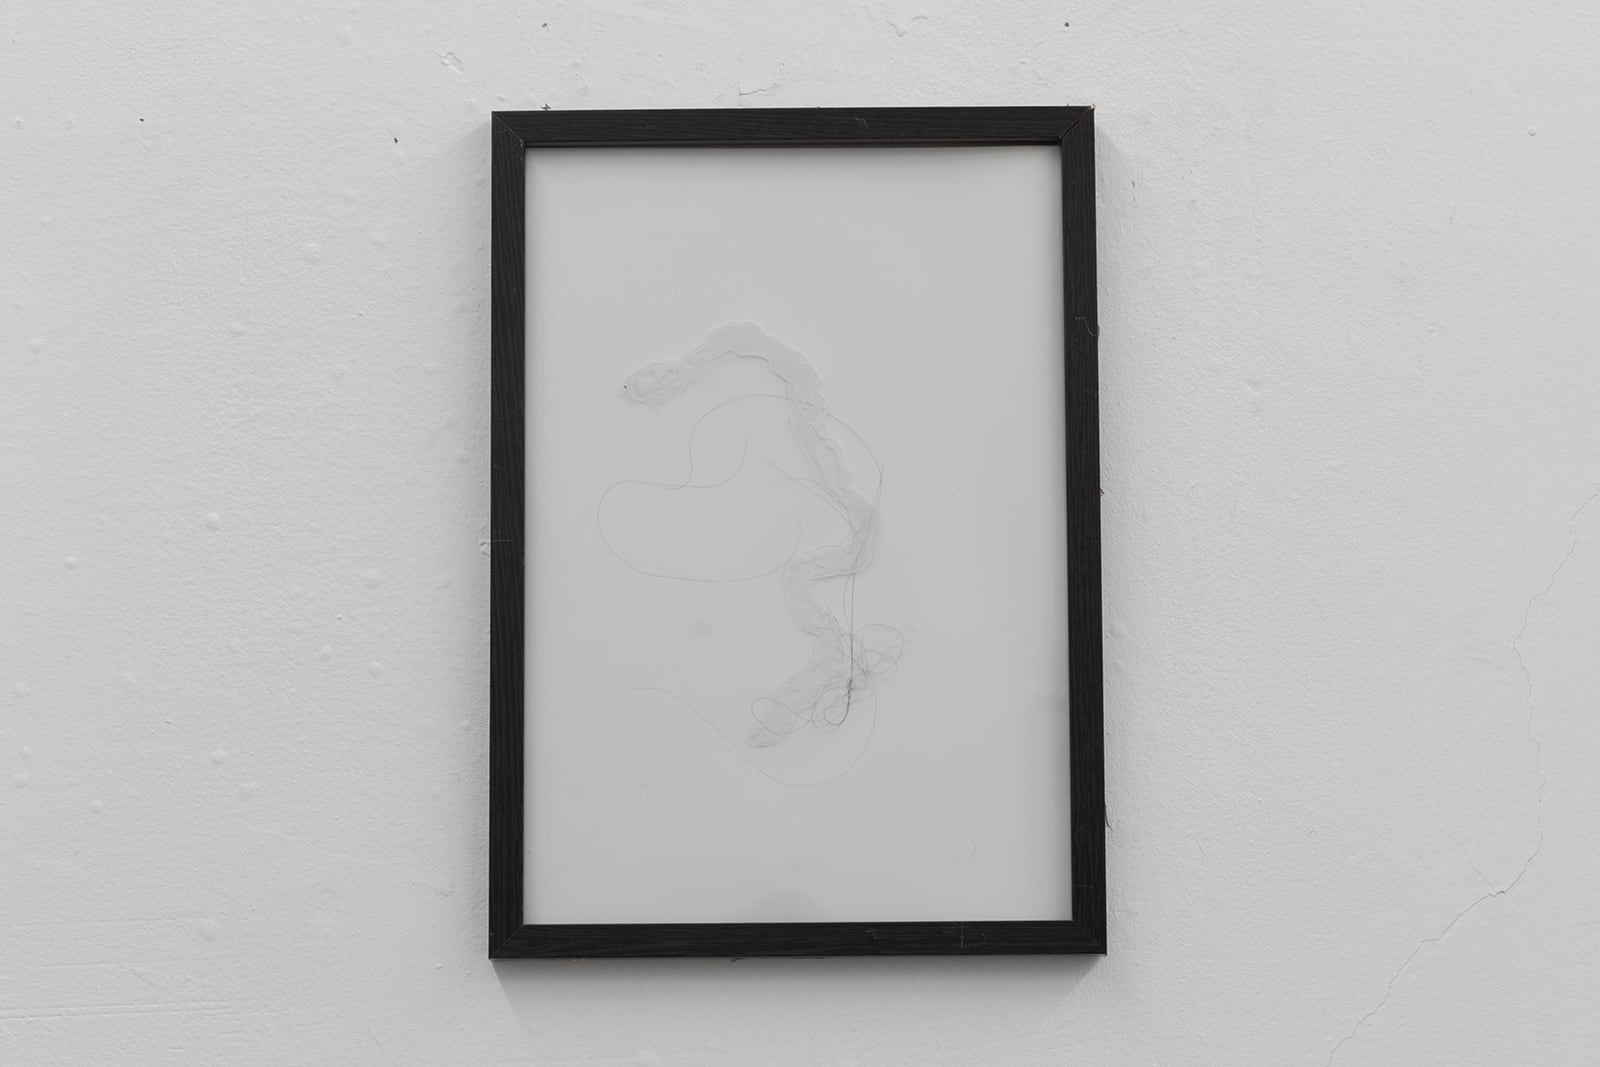 Vadim Murin, Untitled, 2019, artist frame with glass, silicone, male hair, 21 x 29 cm